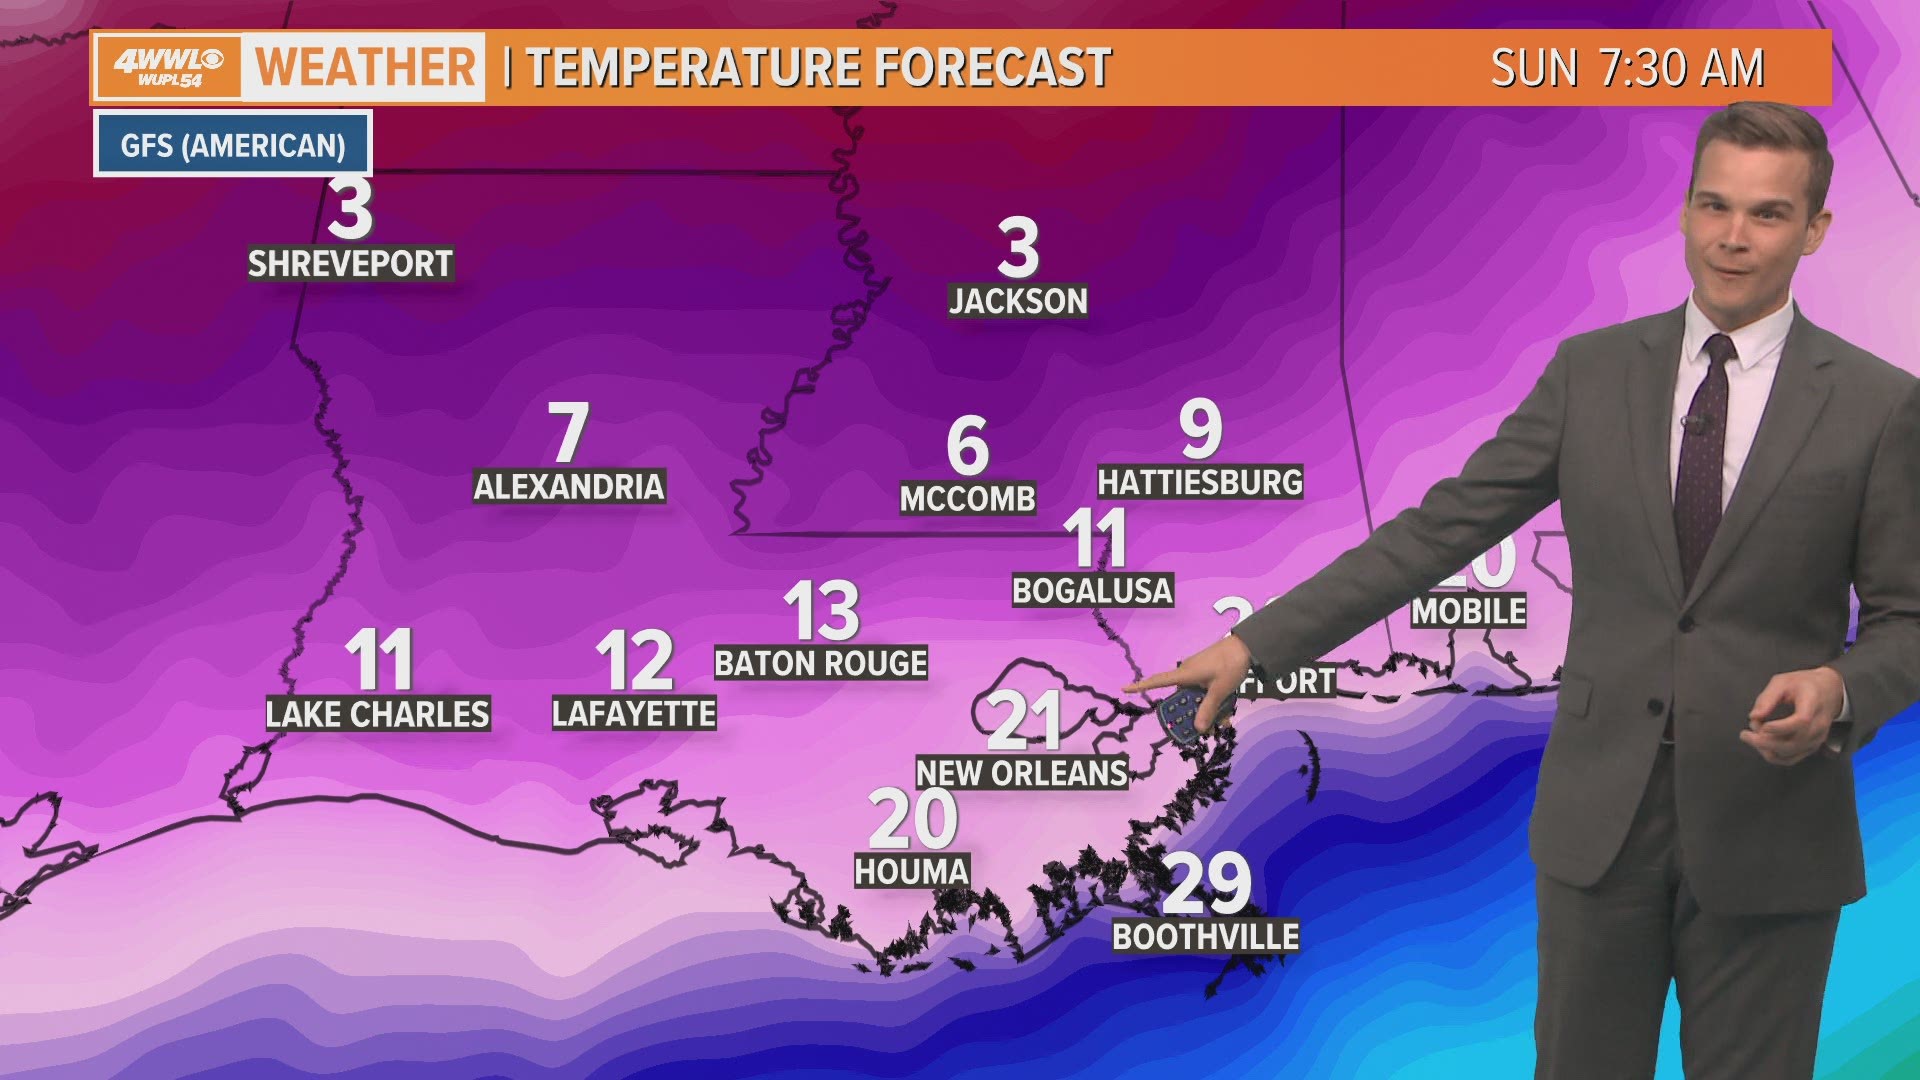 Some of the coldest air of the season could move into the South this weekend, but it's not a guarantee at this point.